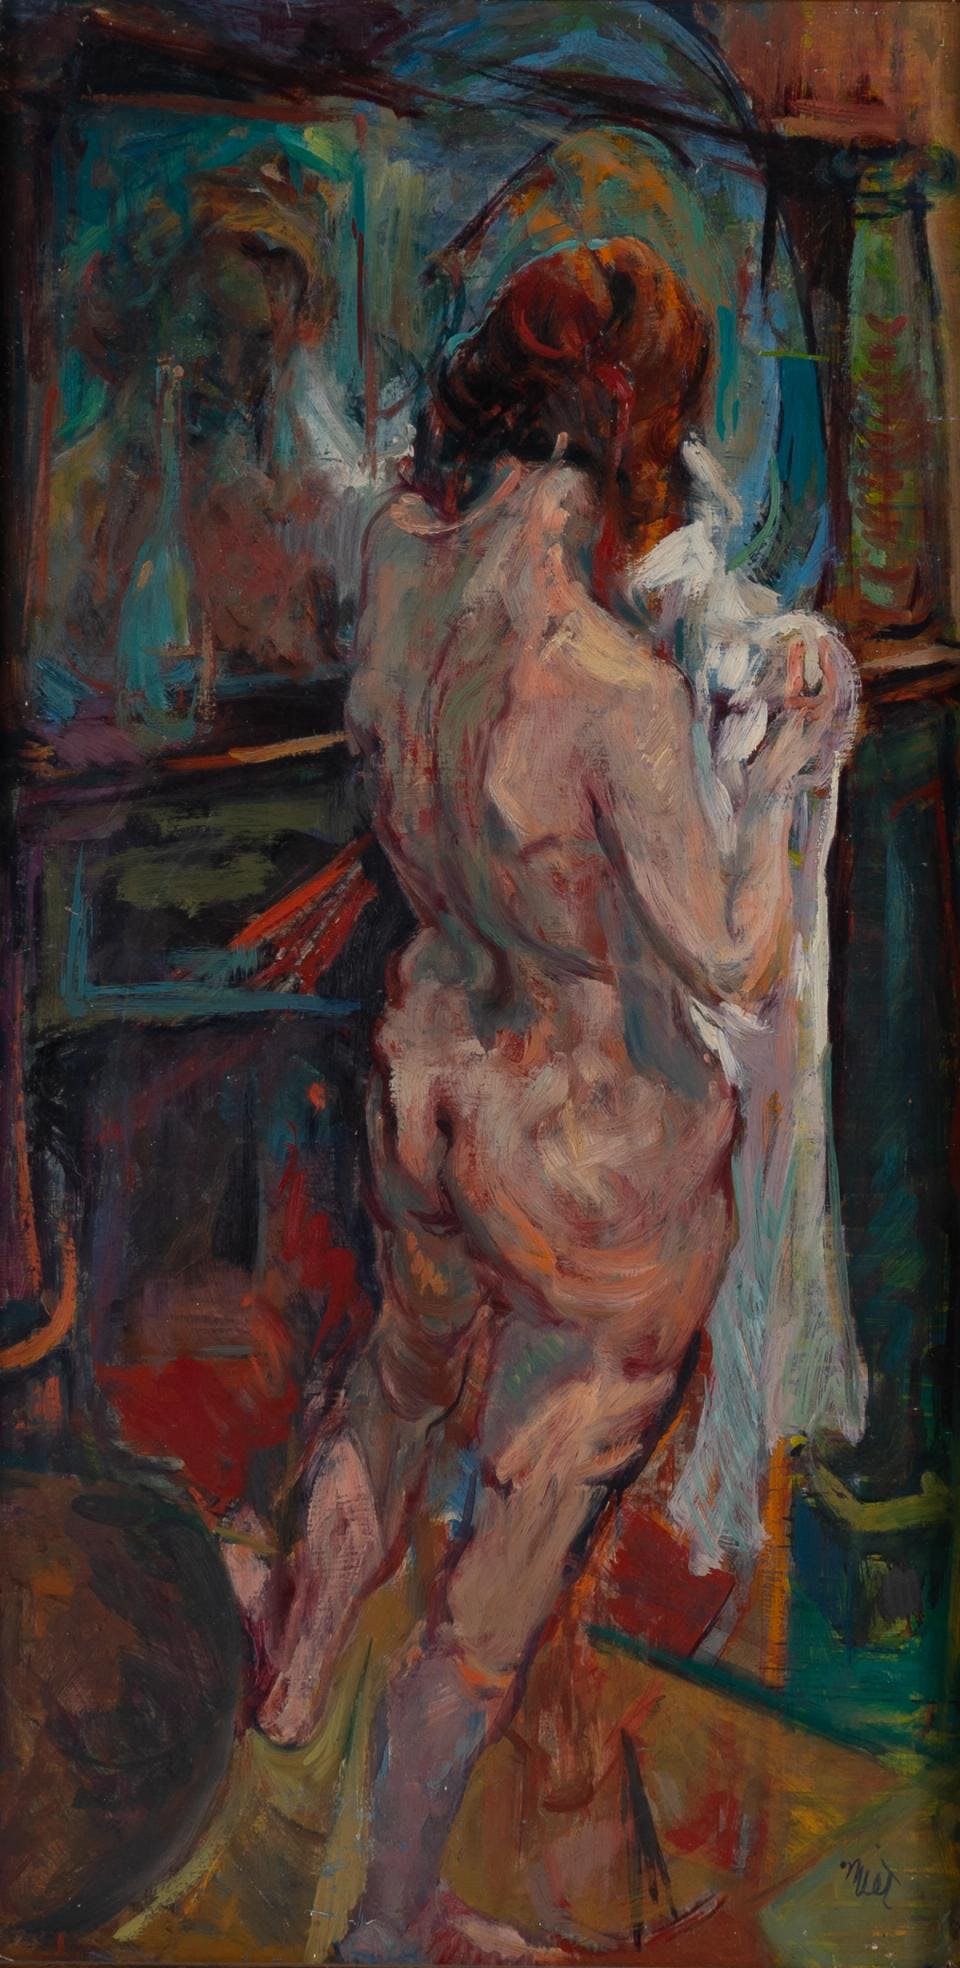 A painting of a the back of a nude woman